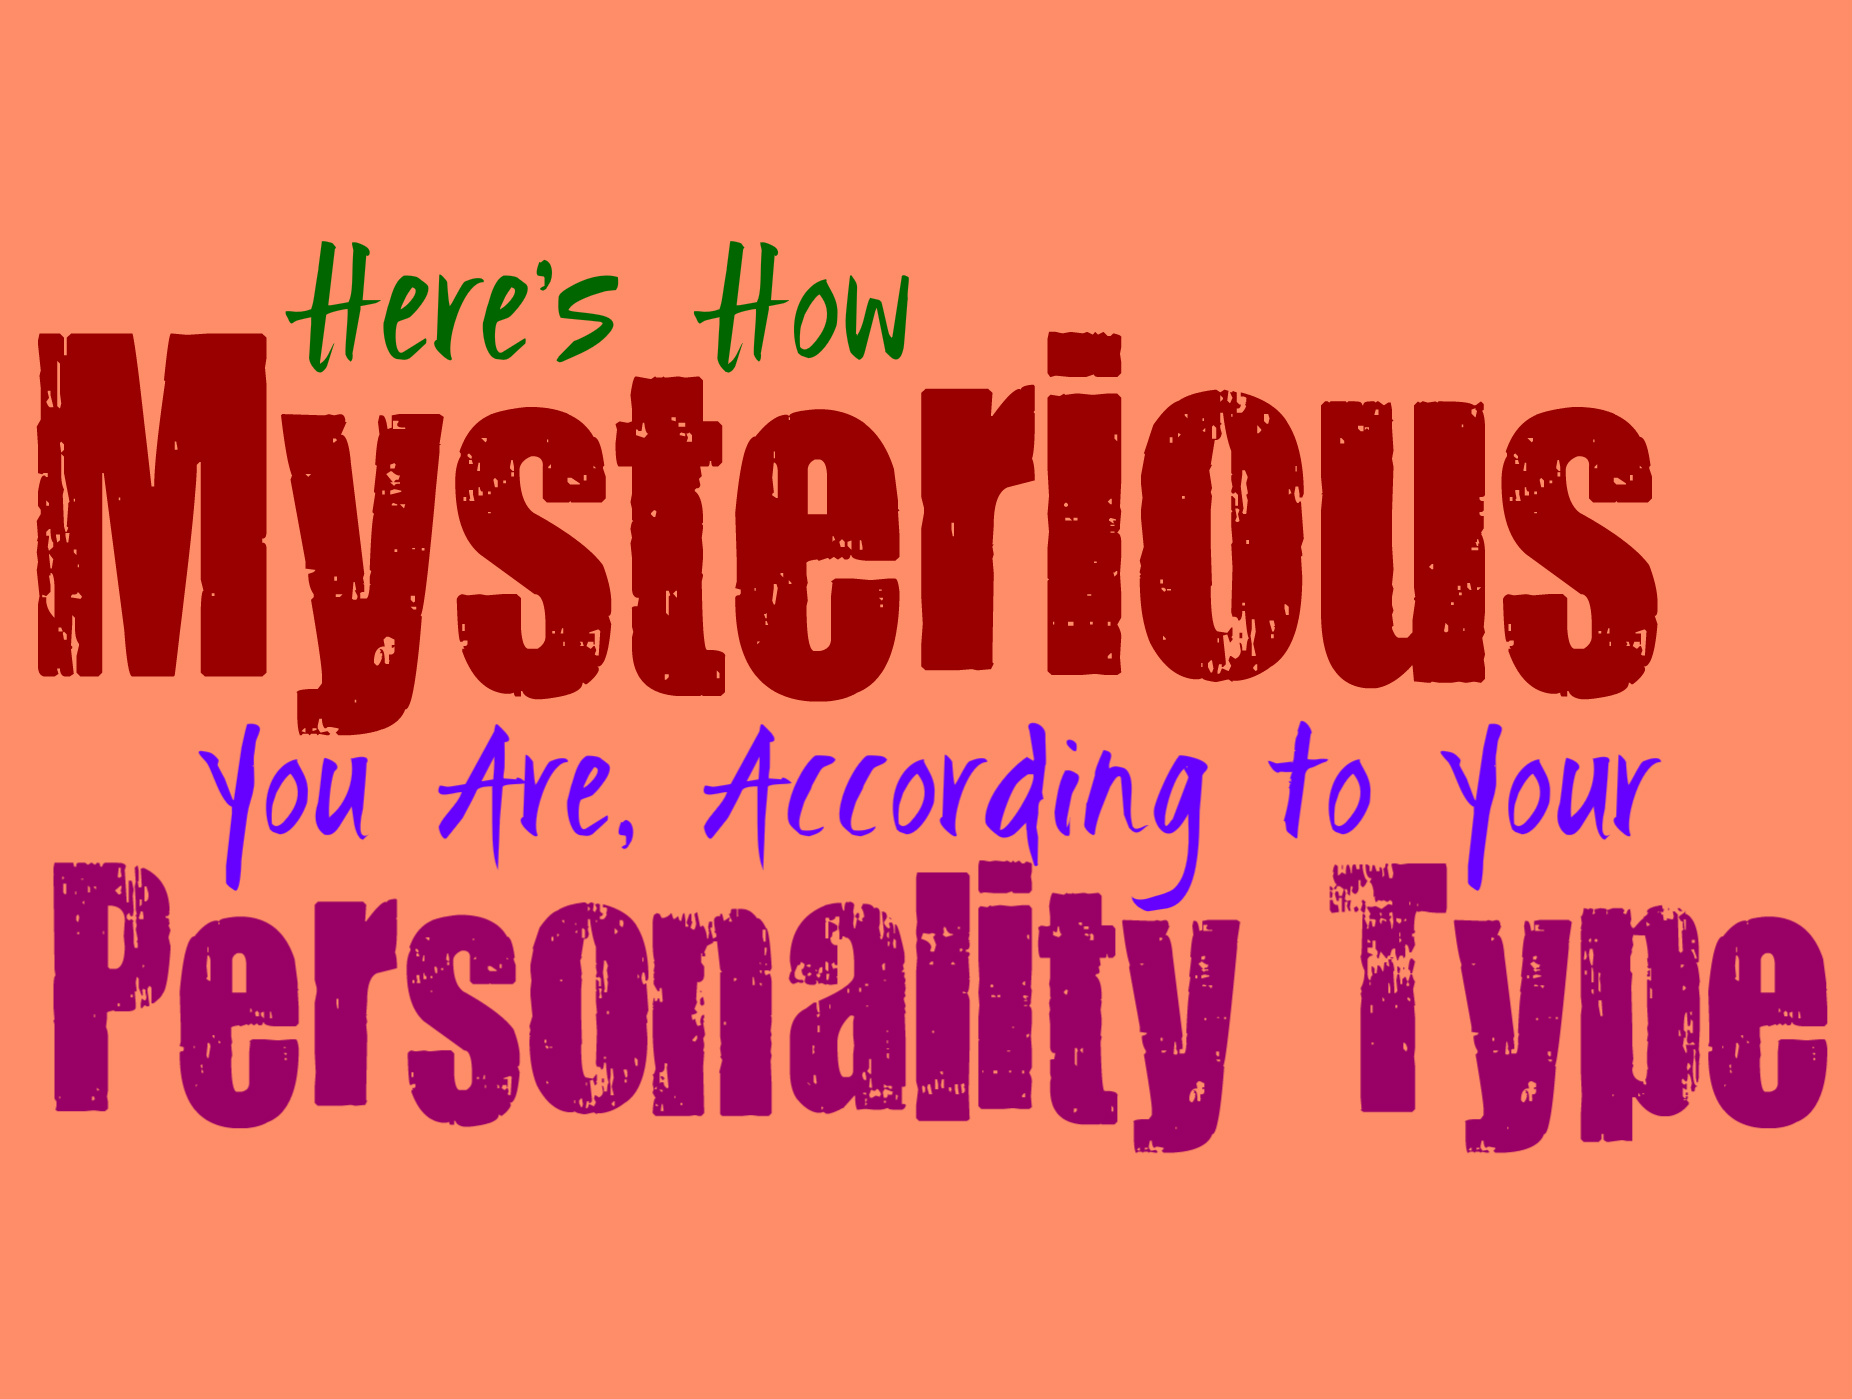 What MBTI is most mysterious?